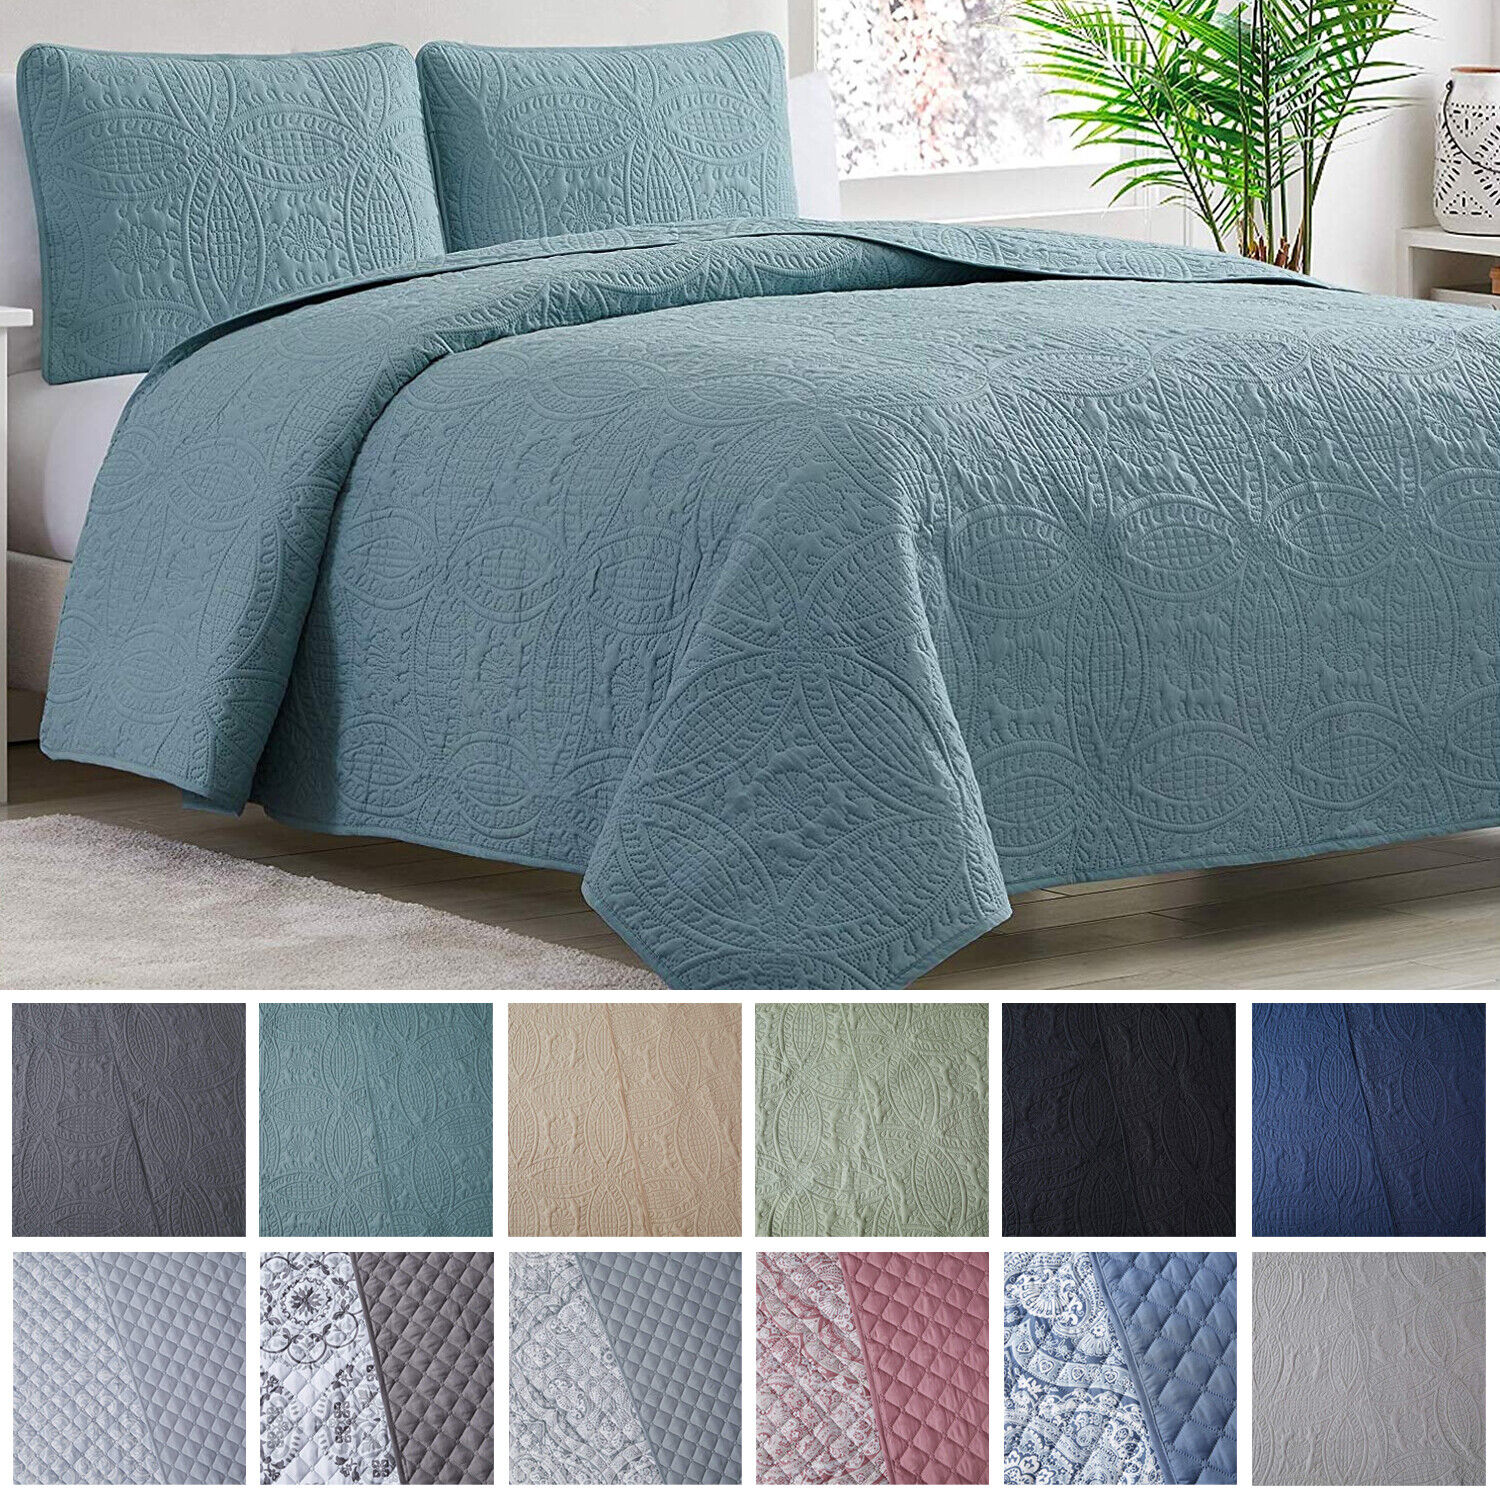 3-piece Oversized Bed Cover, Ultrasonic Quilt